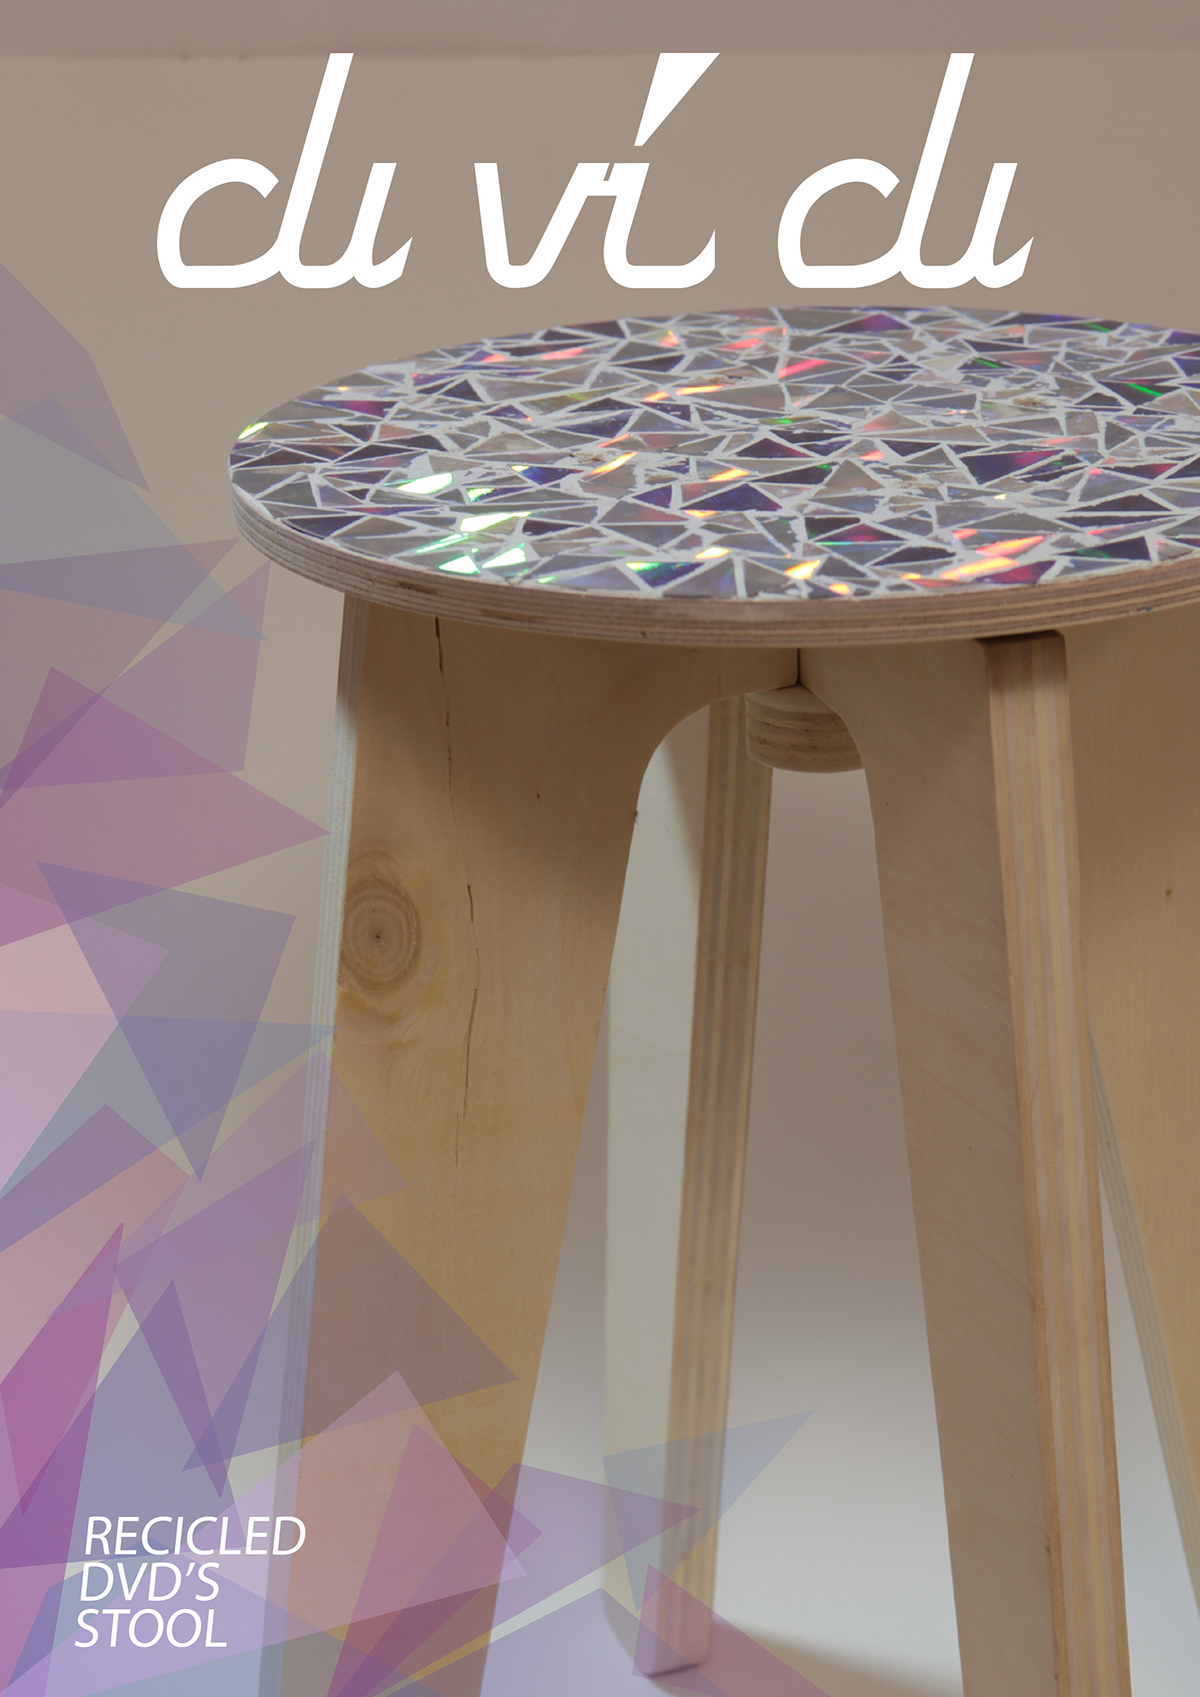 stool RECYCLED recycling wood mosaic pattern holographic DVD